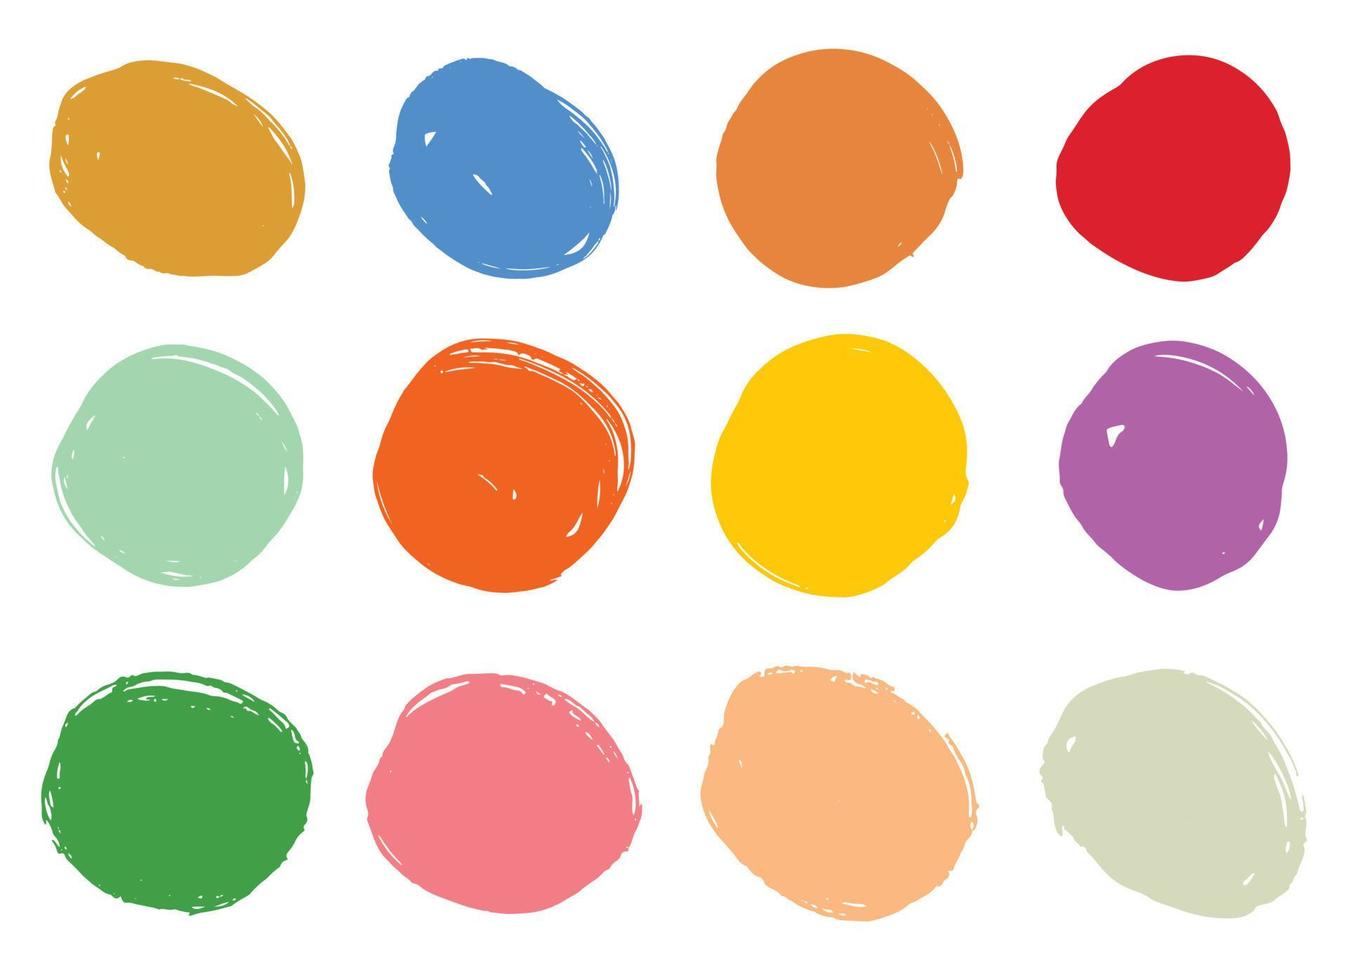 Hand drawn colored watercolor round spots and stains vector illustration